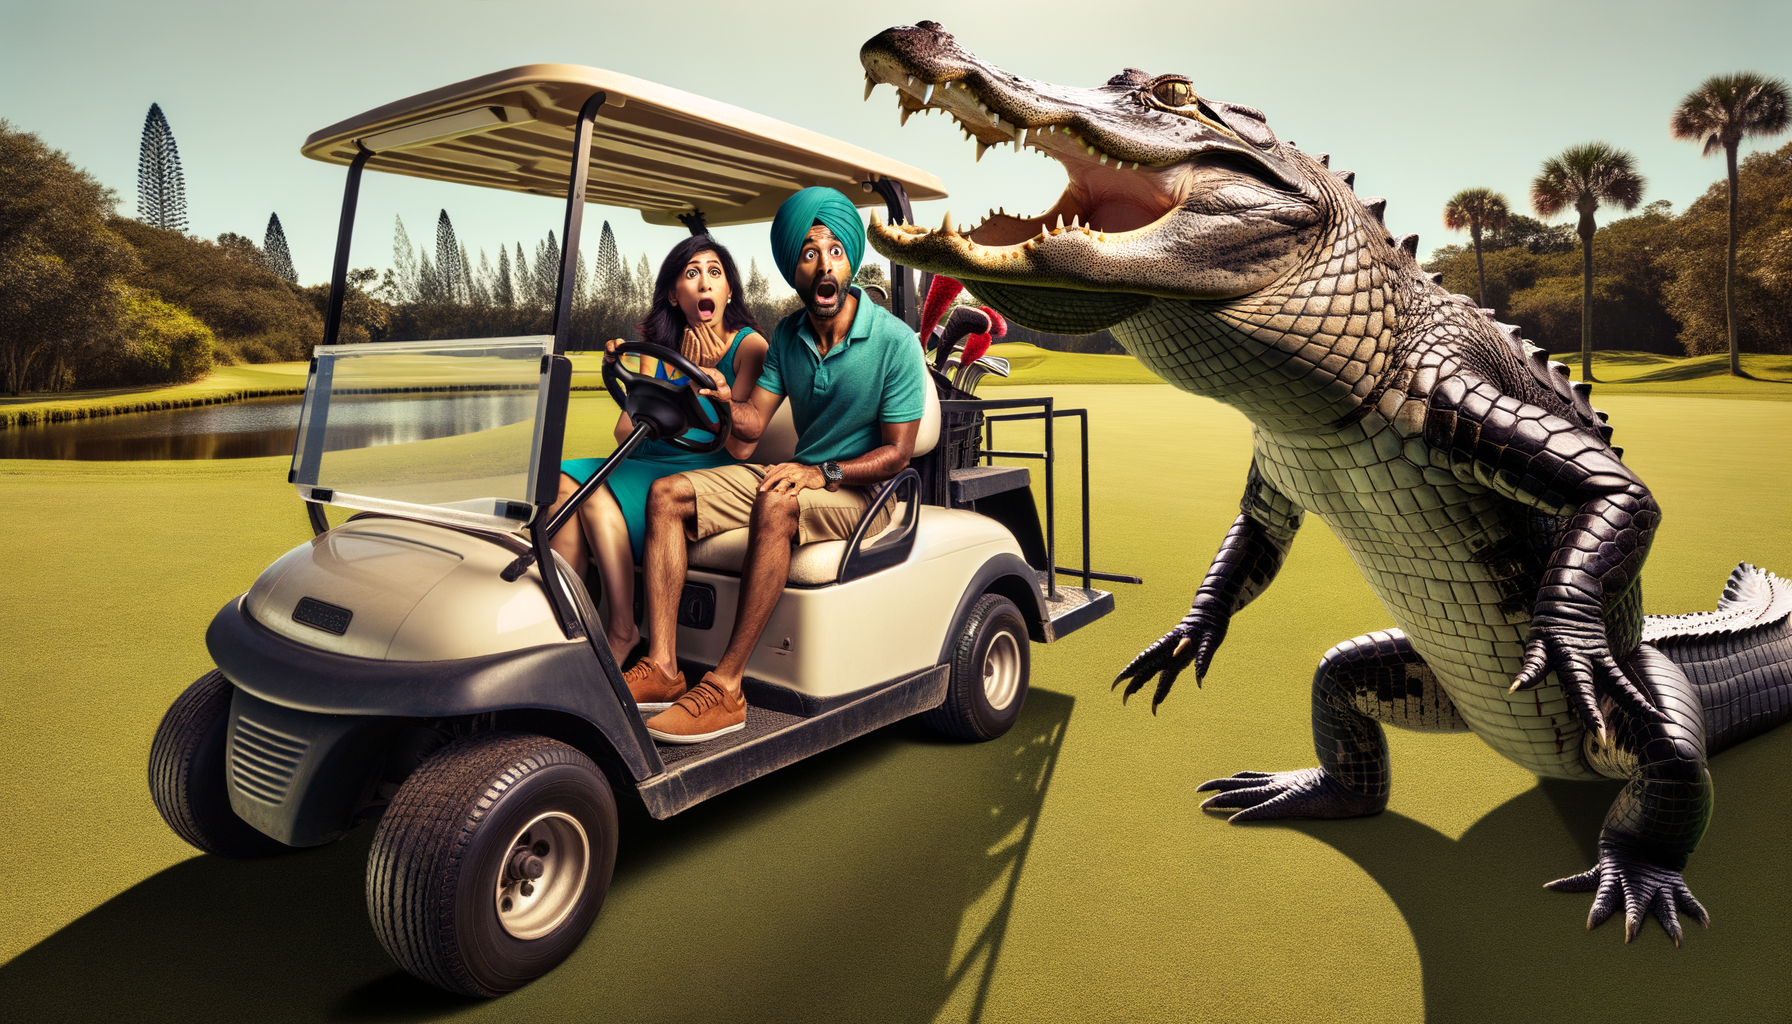 shocking footage inside: a florida couple's encounter with an alligator while riding a golf cart raises questions about safety and wildlife interactions.